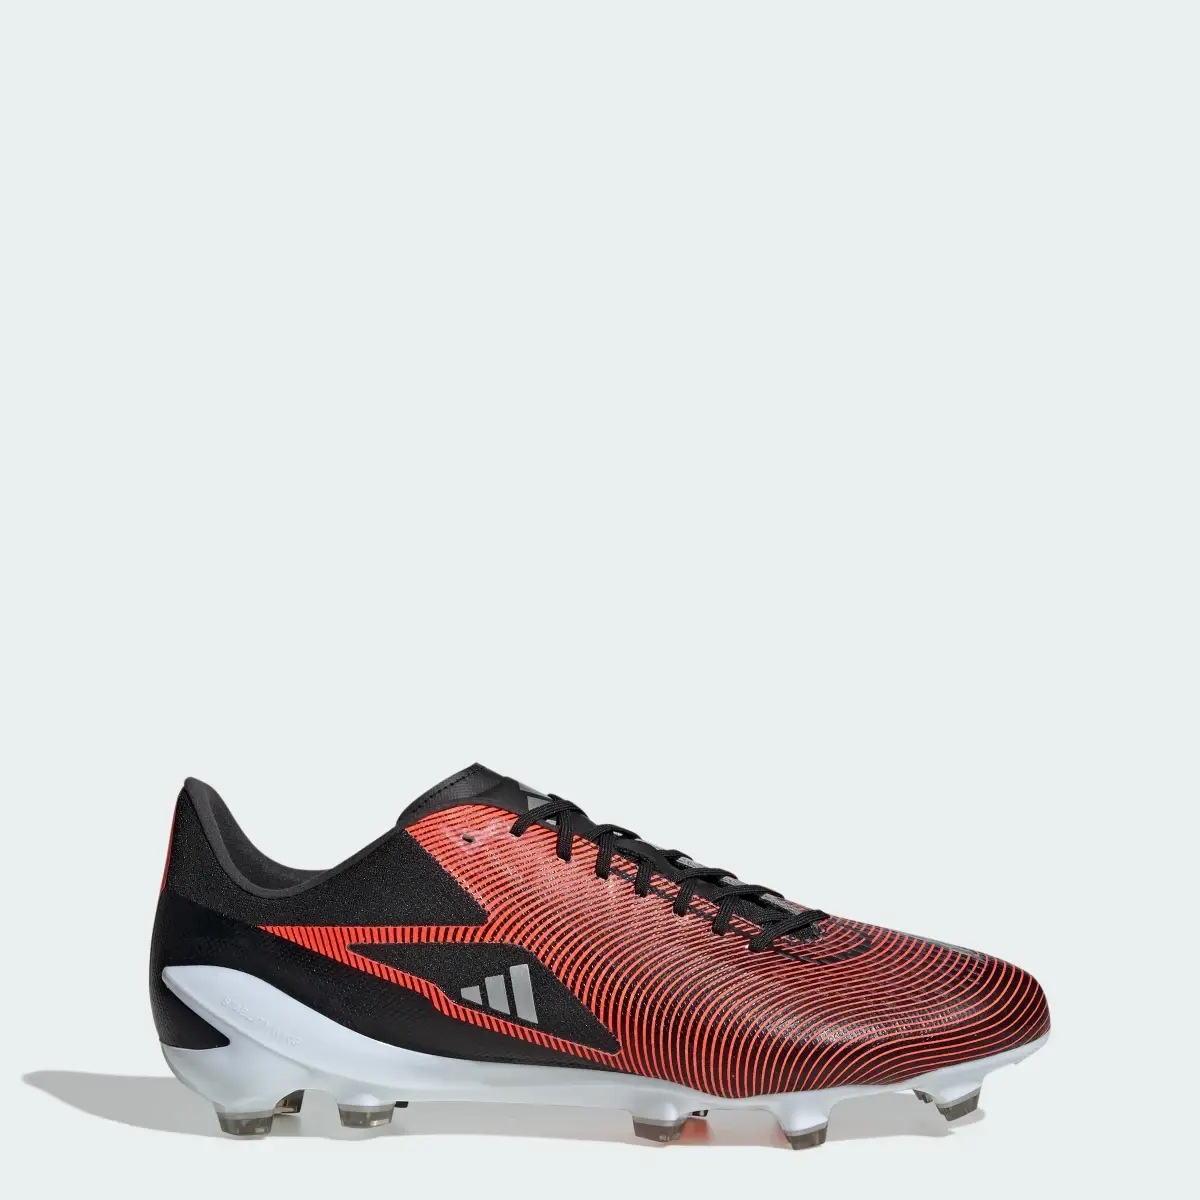 Adidas Adizero RS15 Pro Firm Ground Rugby Boots. 1